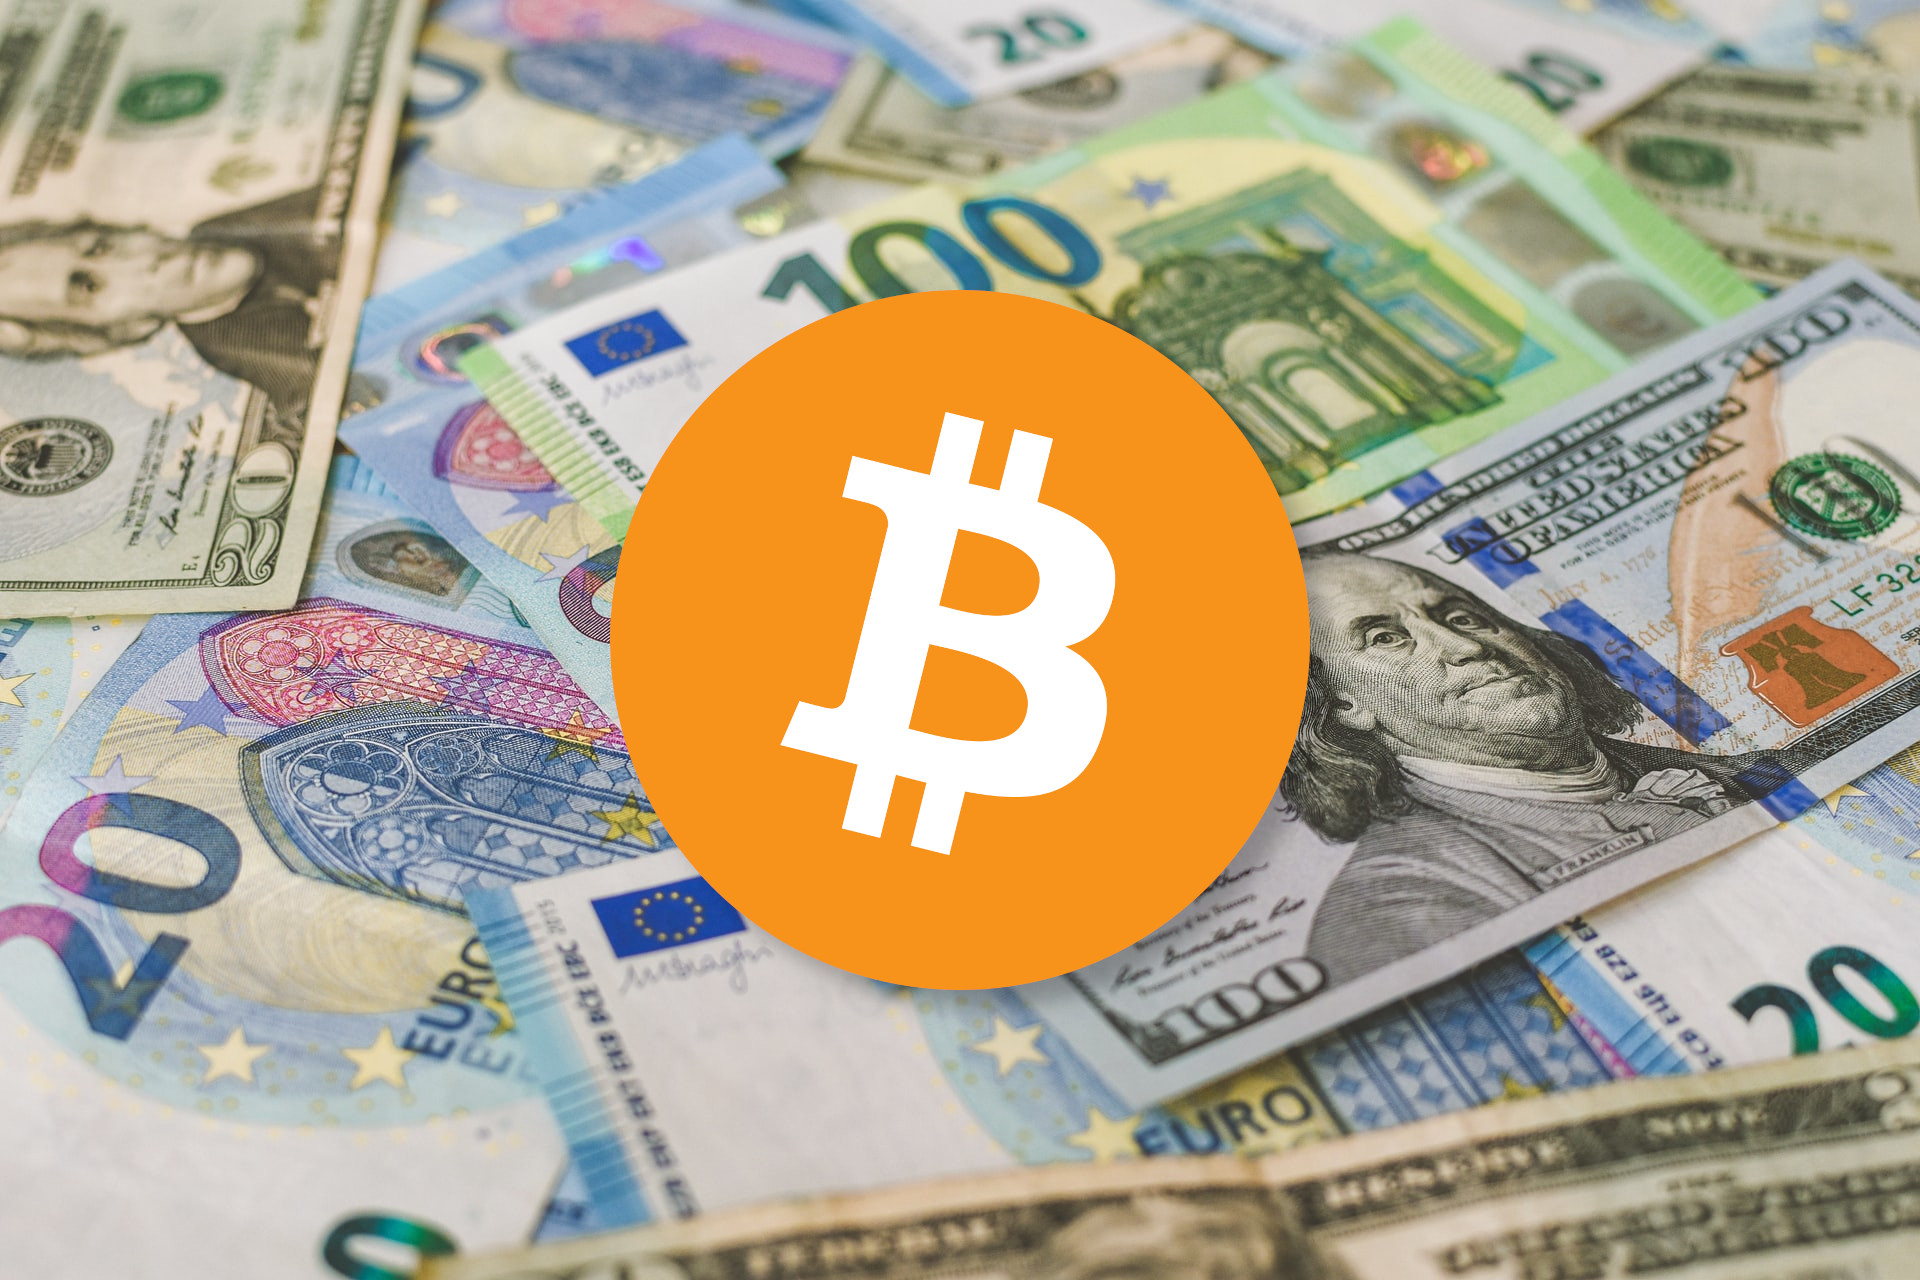 Bitcoin (BTC) and fiat currency cover image